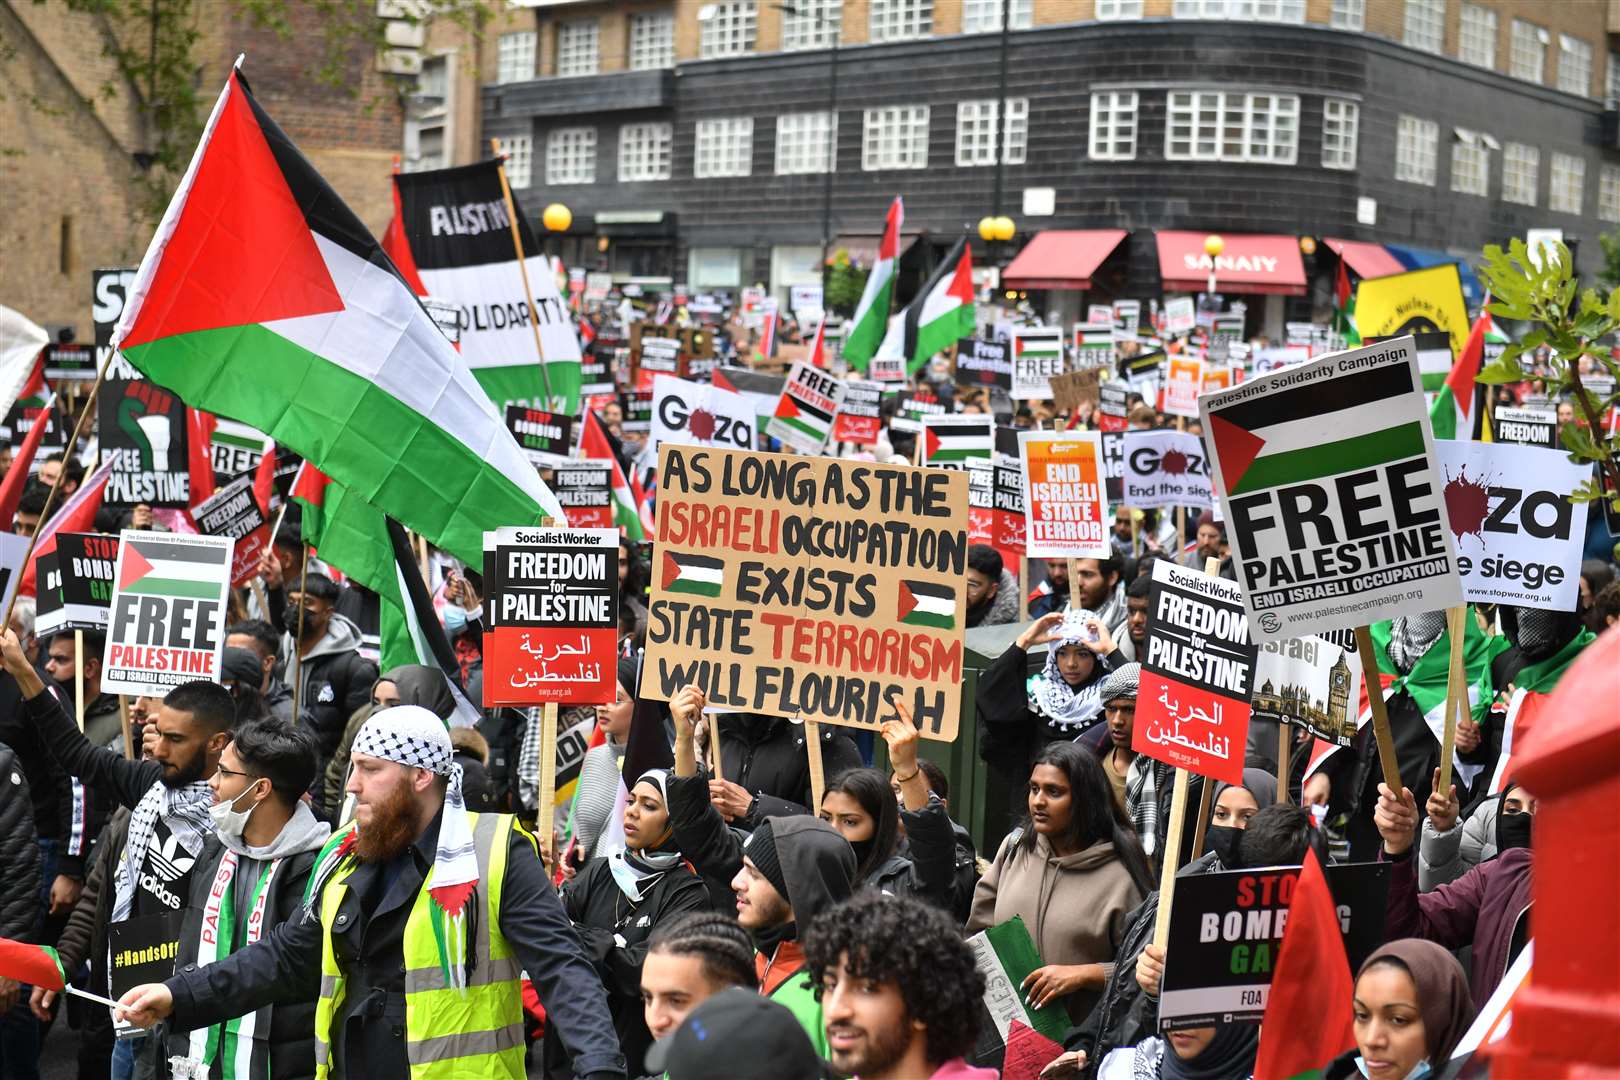 Thousands of people marched through London on Saturday to the gates of the Israeli embassy, as part of pro-Palestine protests (PA)